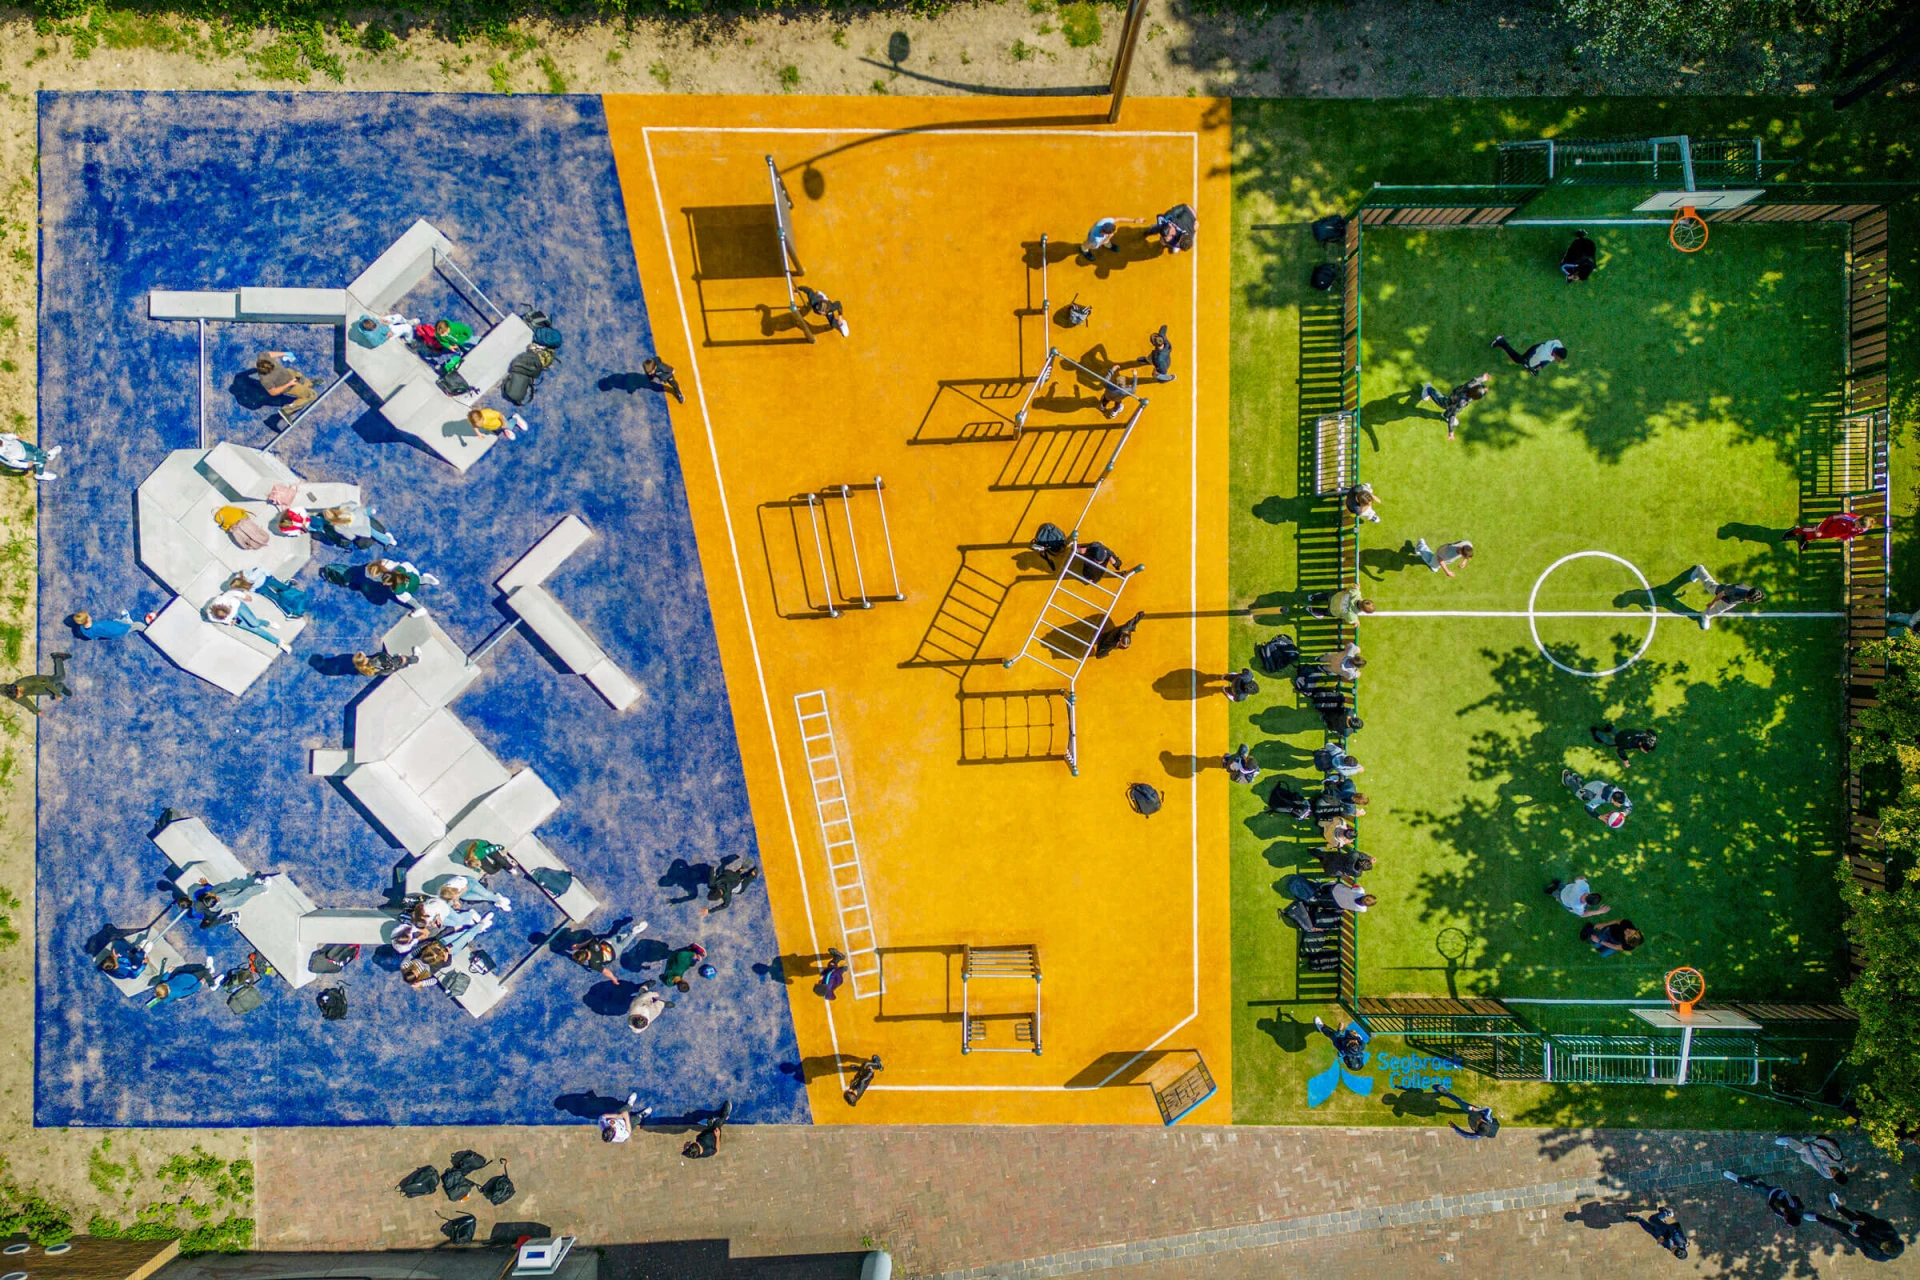 An aerial view of a school playground with fitness and ball game area